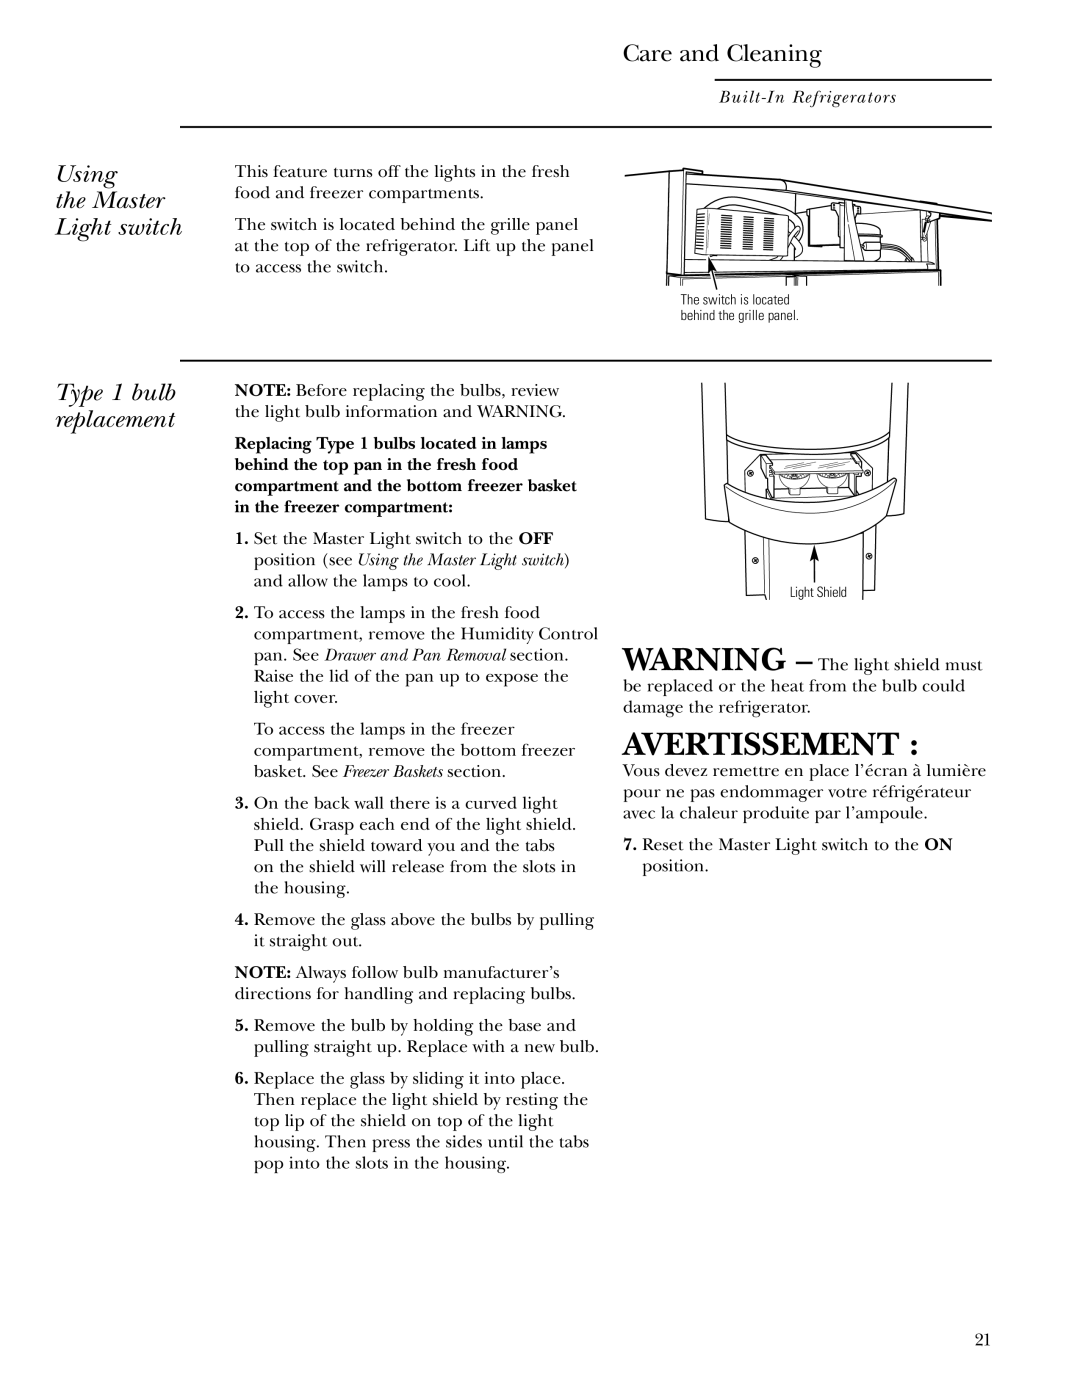 GE Monogram 48, 42 owner manual Using the Master Light switch Type 1 bulb replacement, Avertissement, Care and Cleaning 